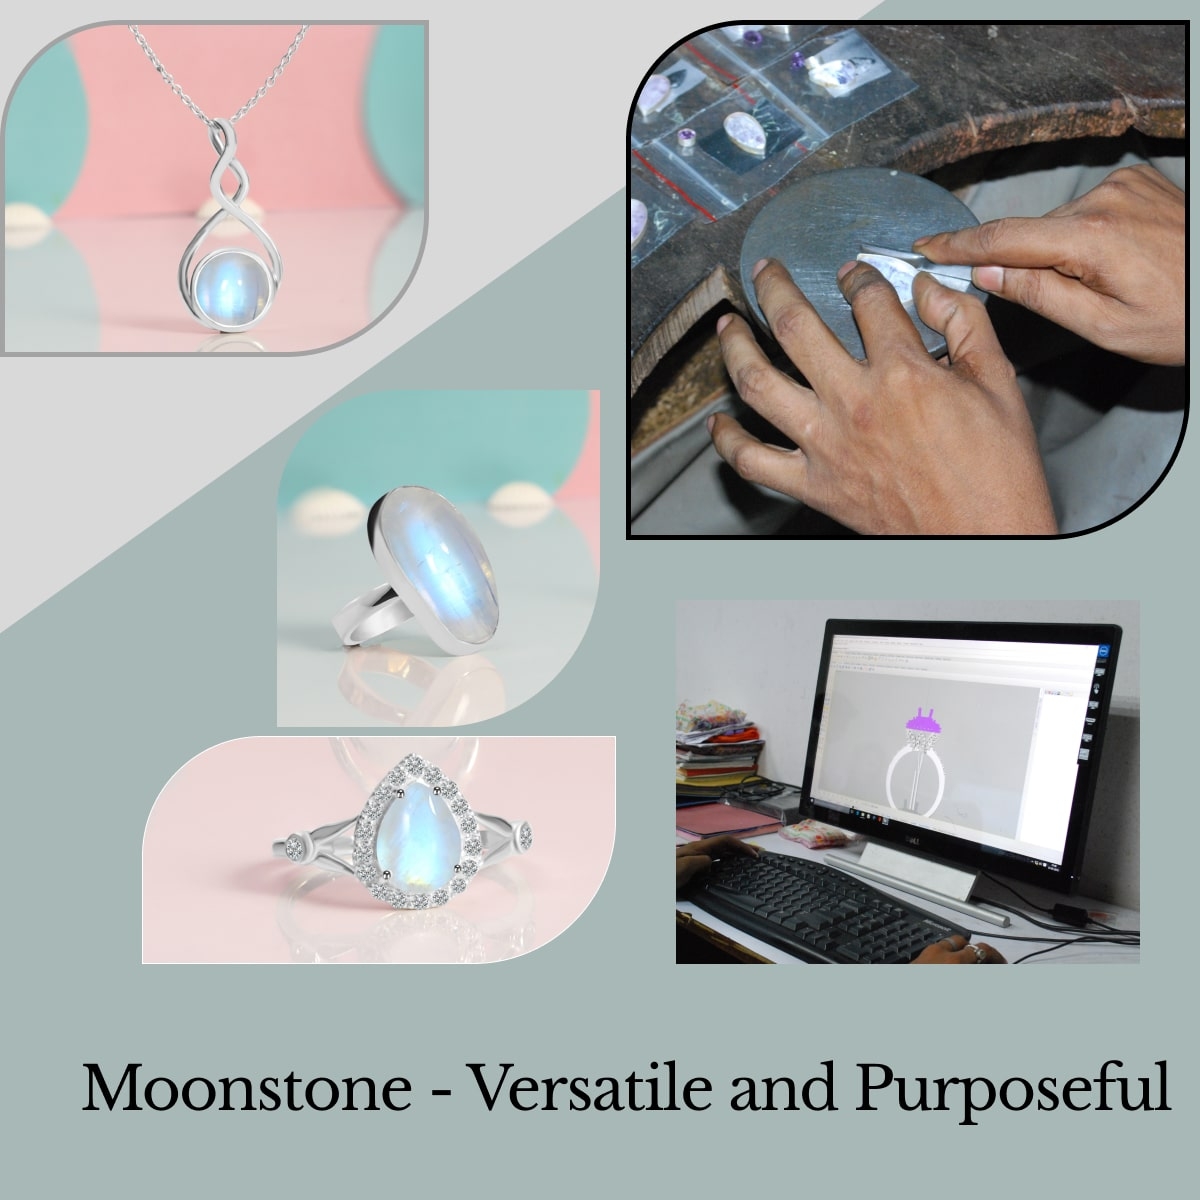 Uses of Moonstone